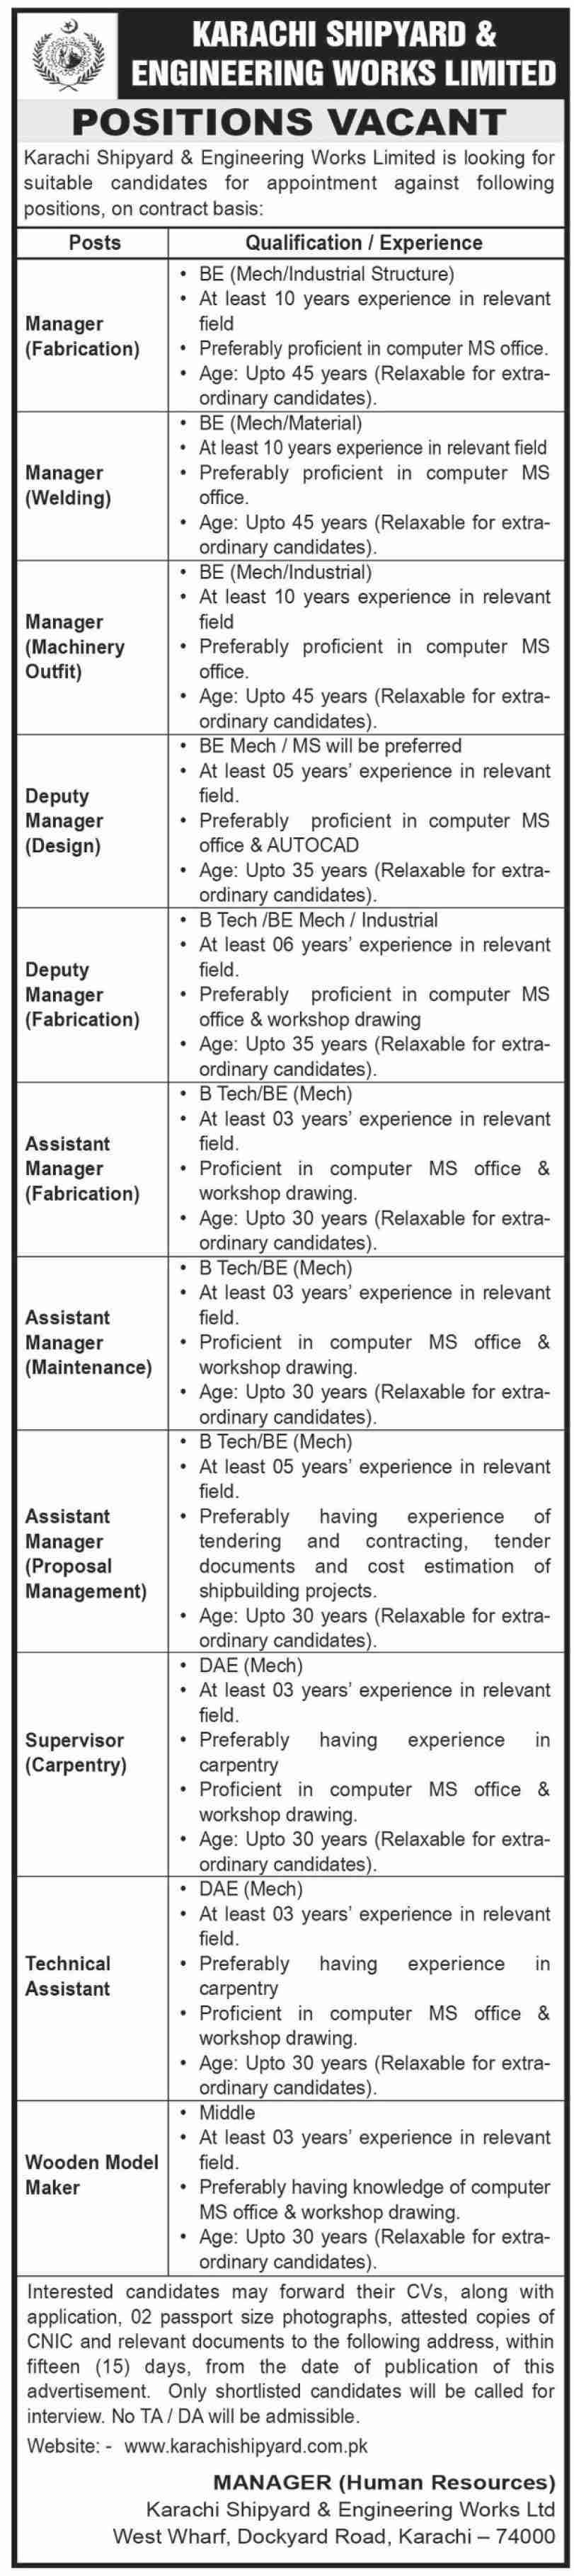 Karachi Shipyard & Engineering Works Limited Jobs 2020 For Managers & Technical Assistant